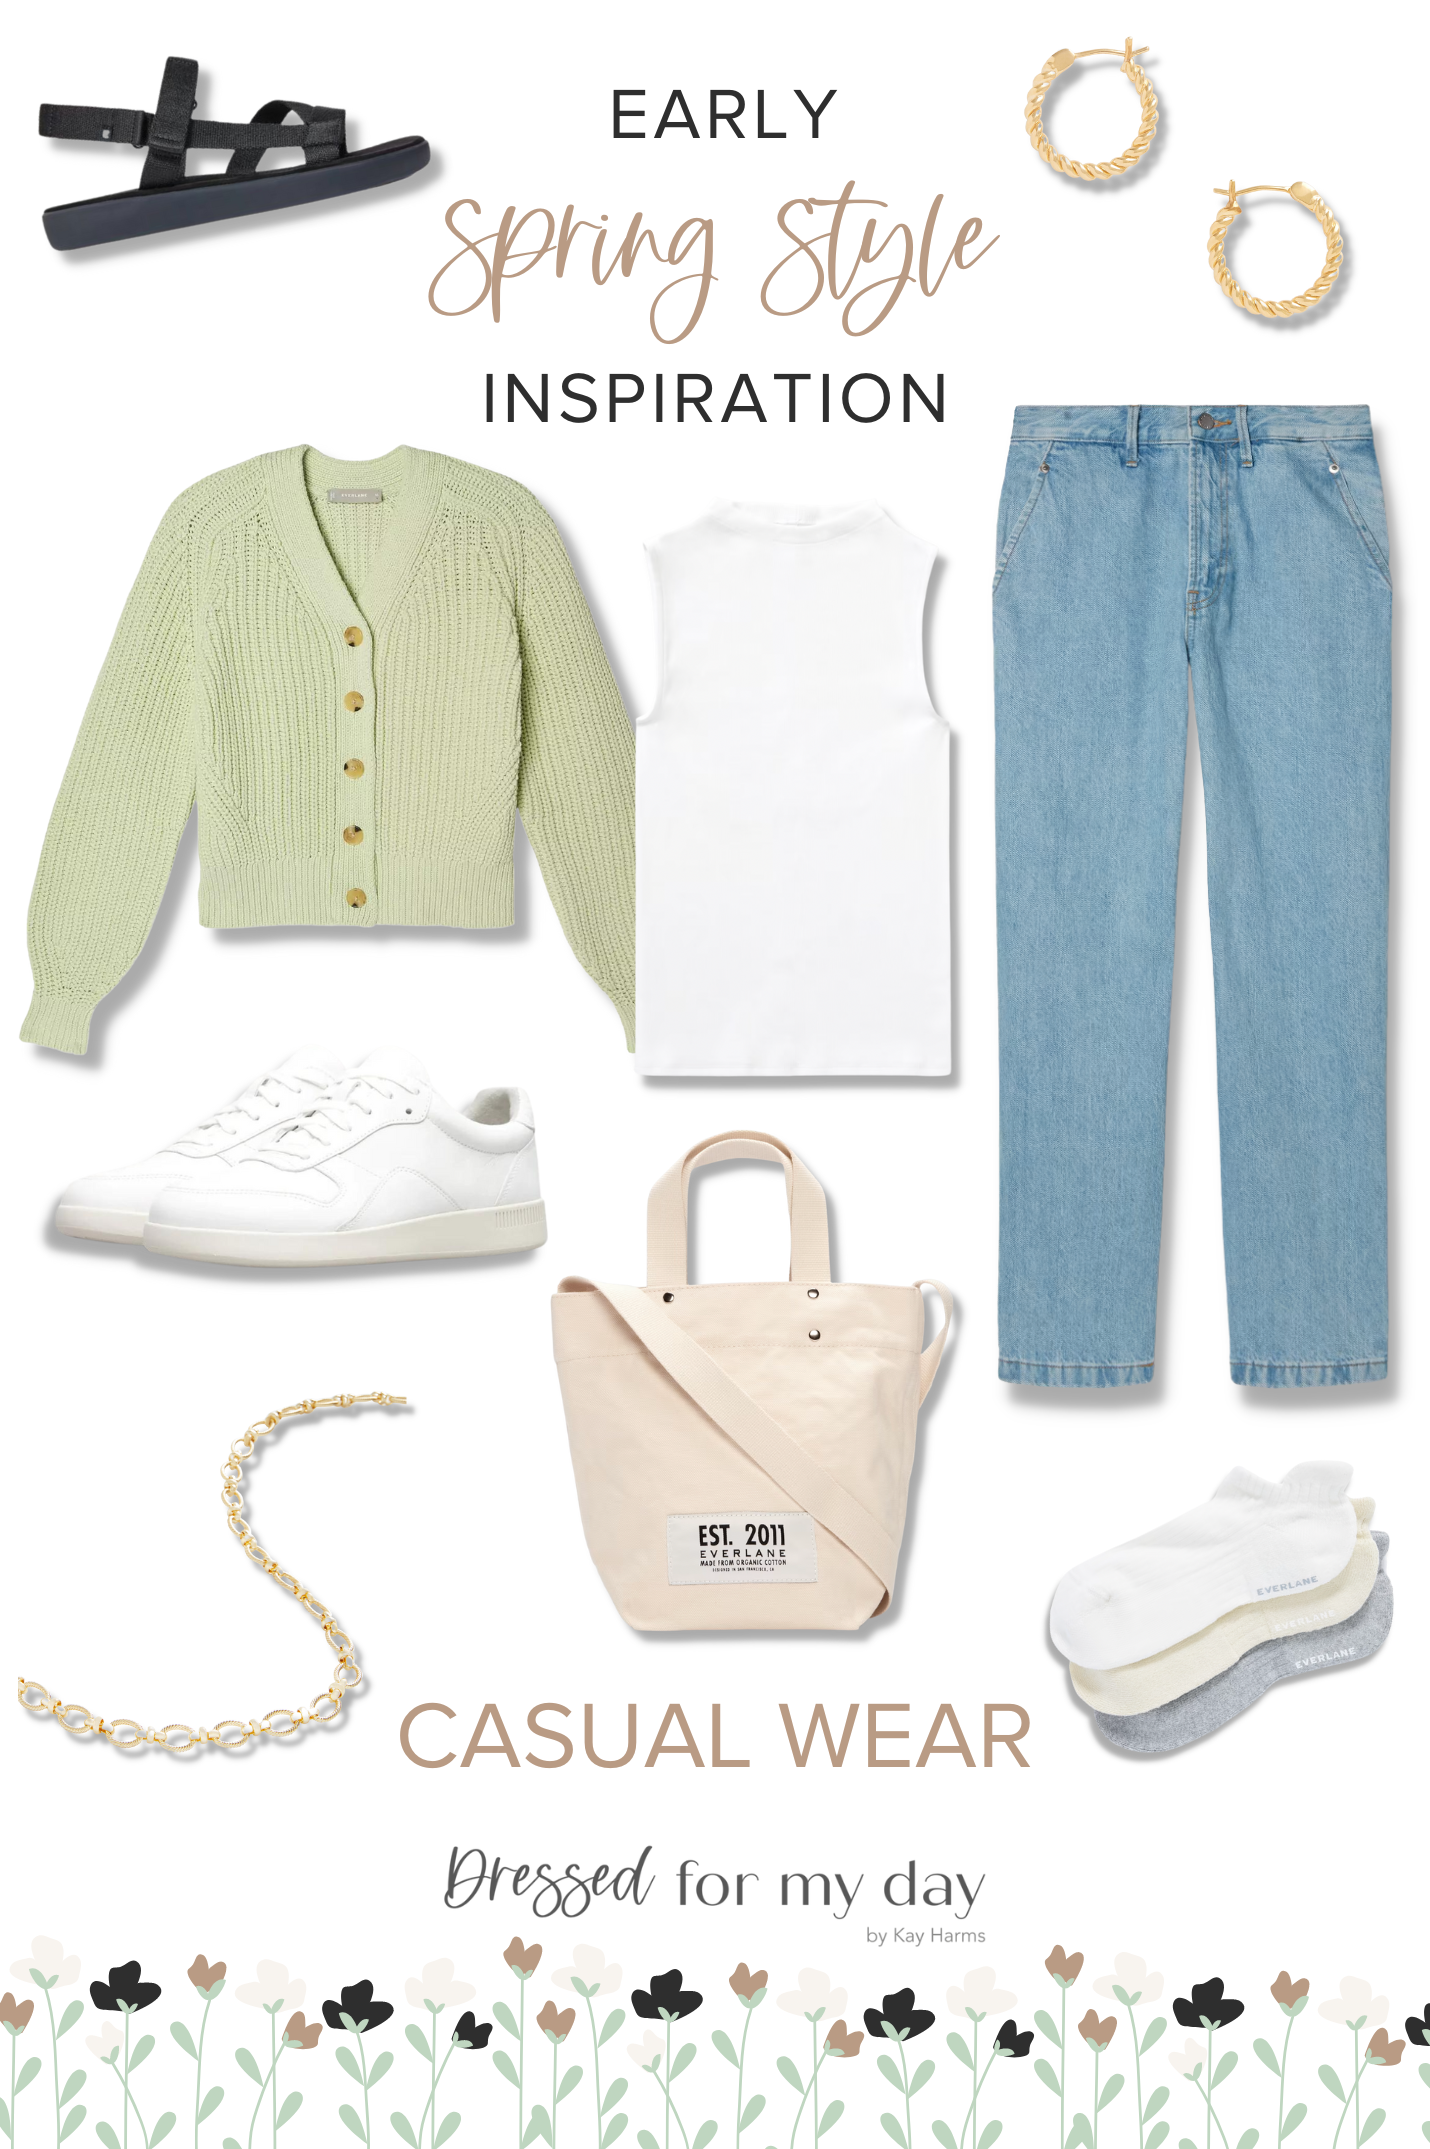 Early Spring Style Inspiration - EVERLANE